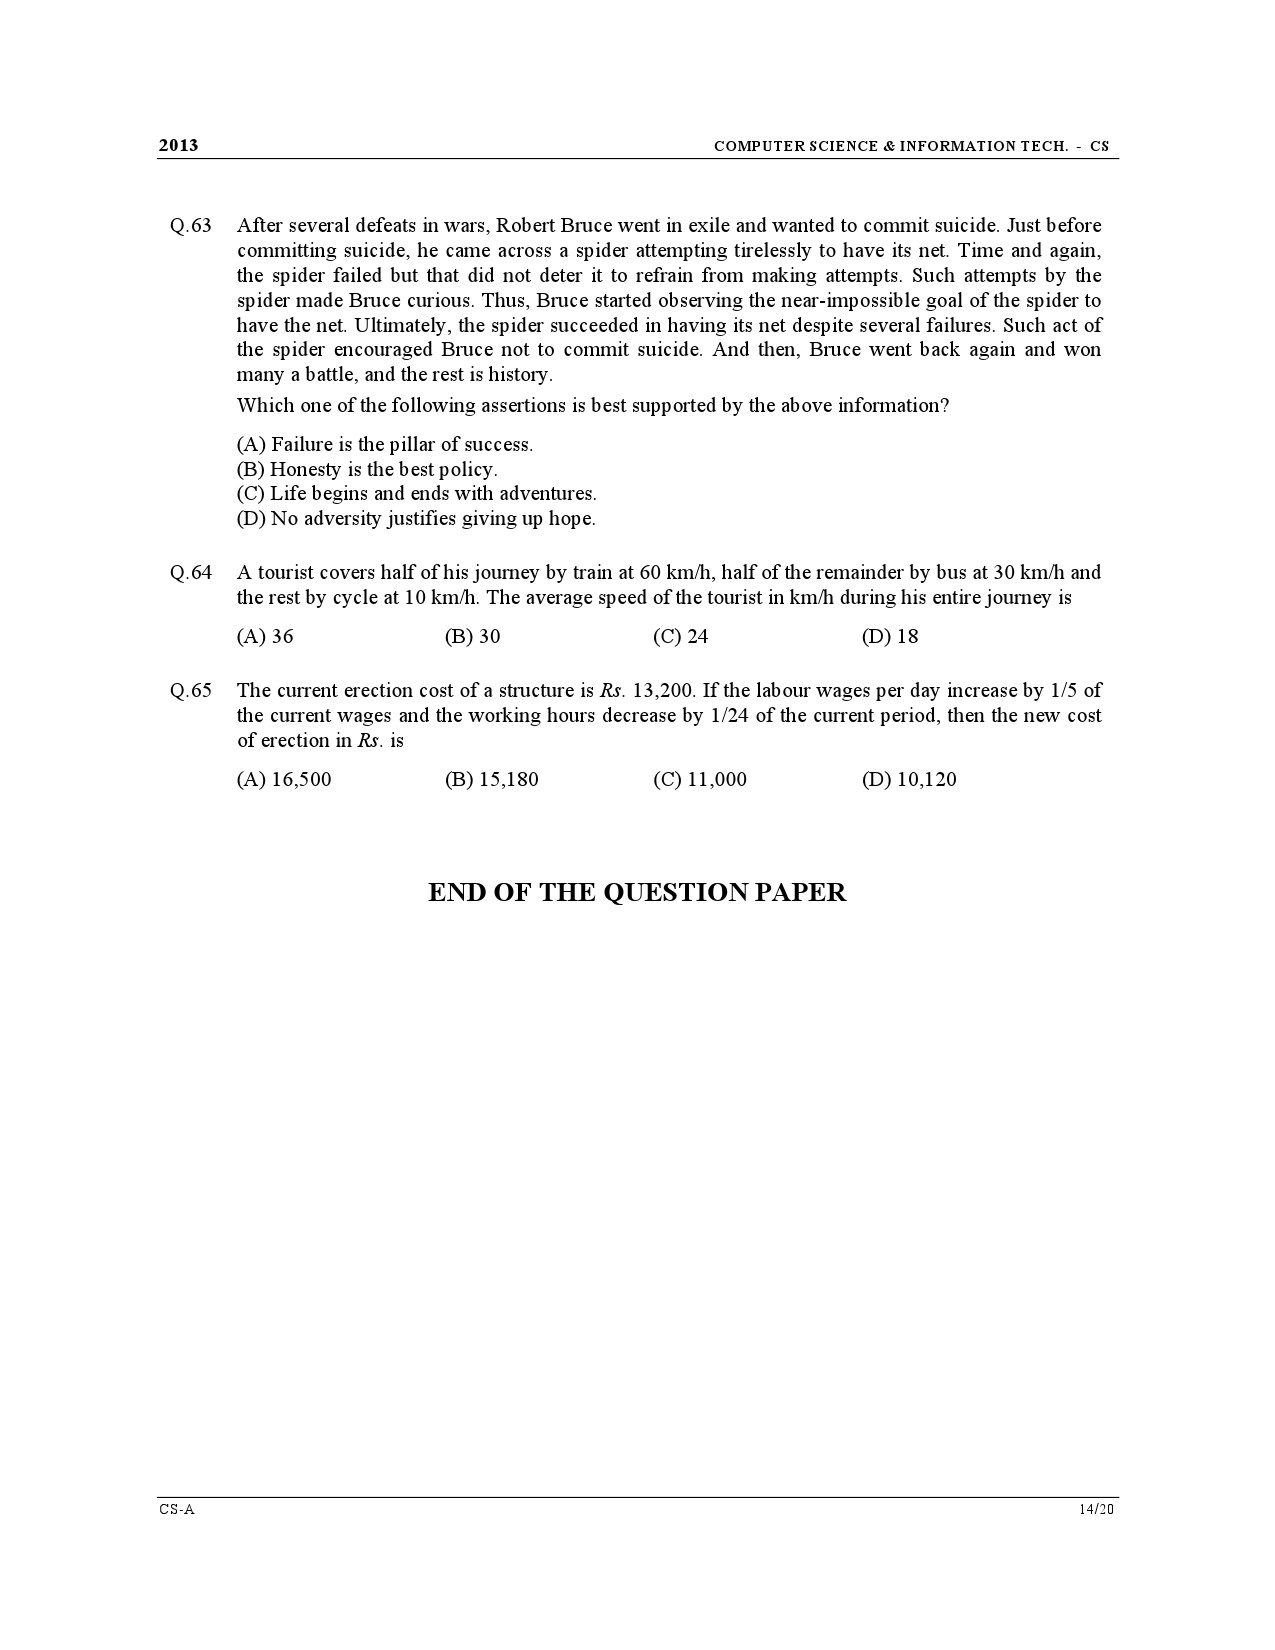 GATE Exam Question Paper 2013 Computer Science and Information Technology 14